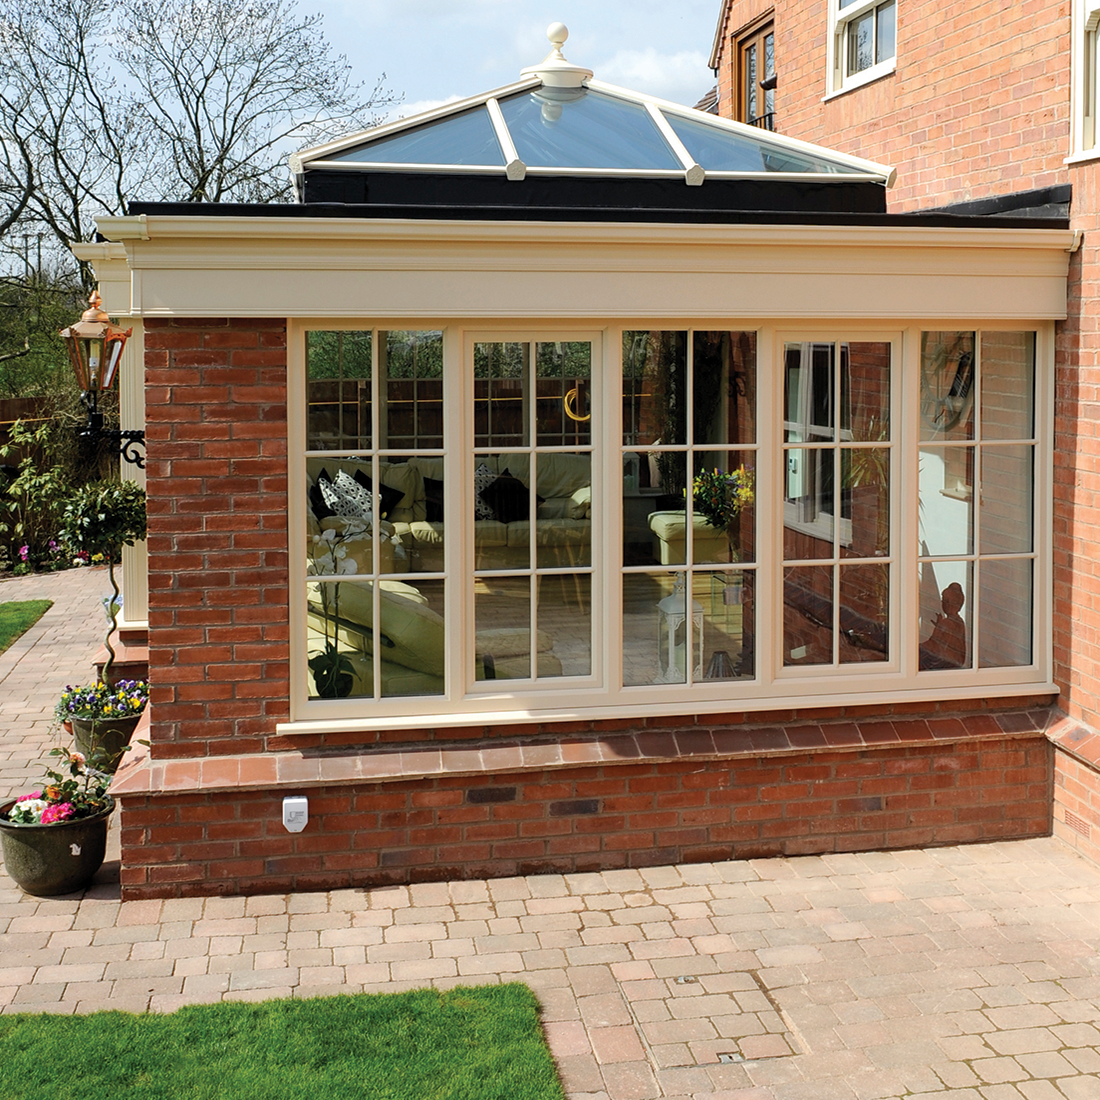 The difference between an orangery and a conservatory